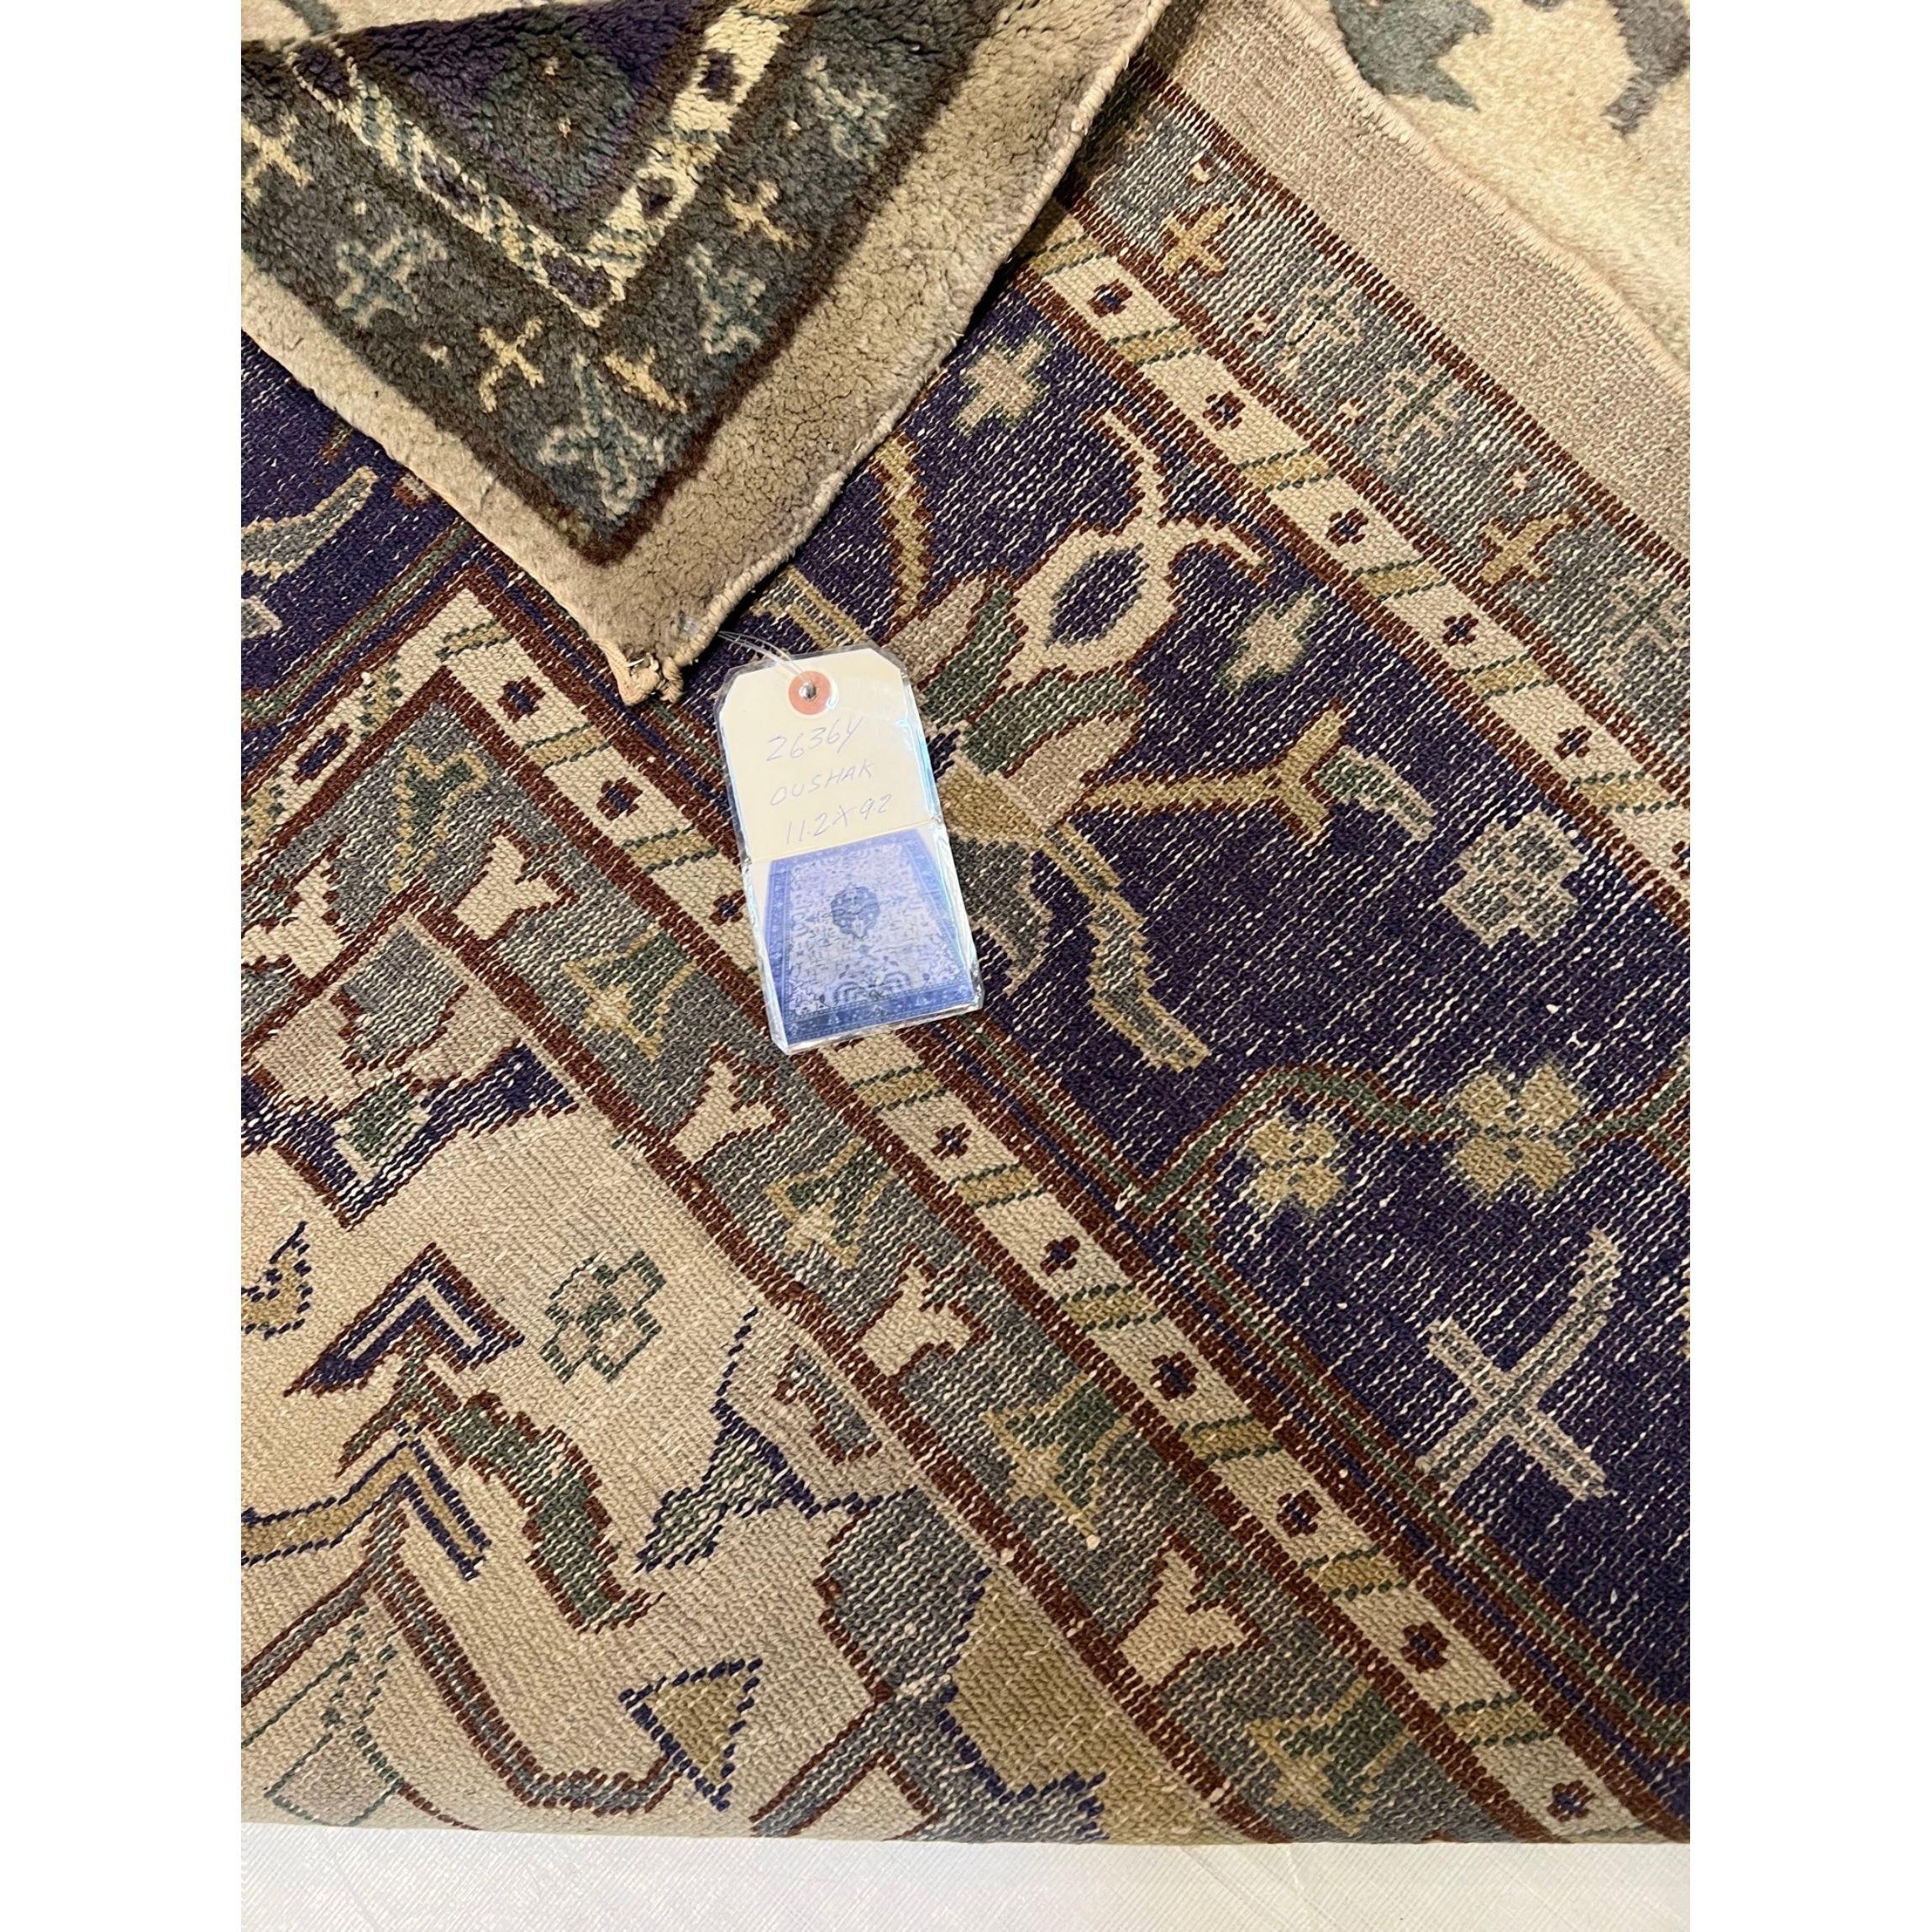 Other Antique Oushak Rug 11.2x9.2 For Sale